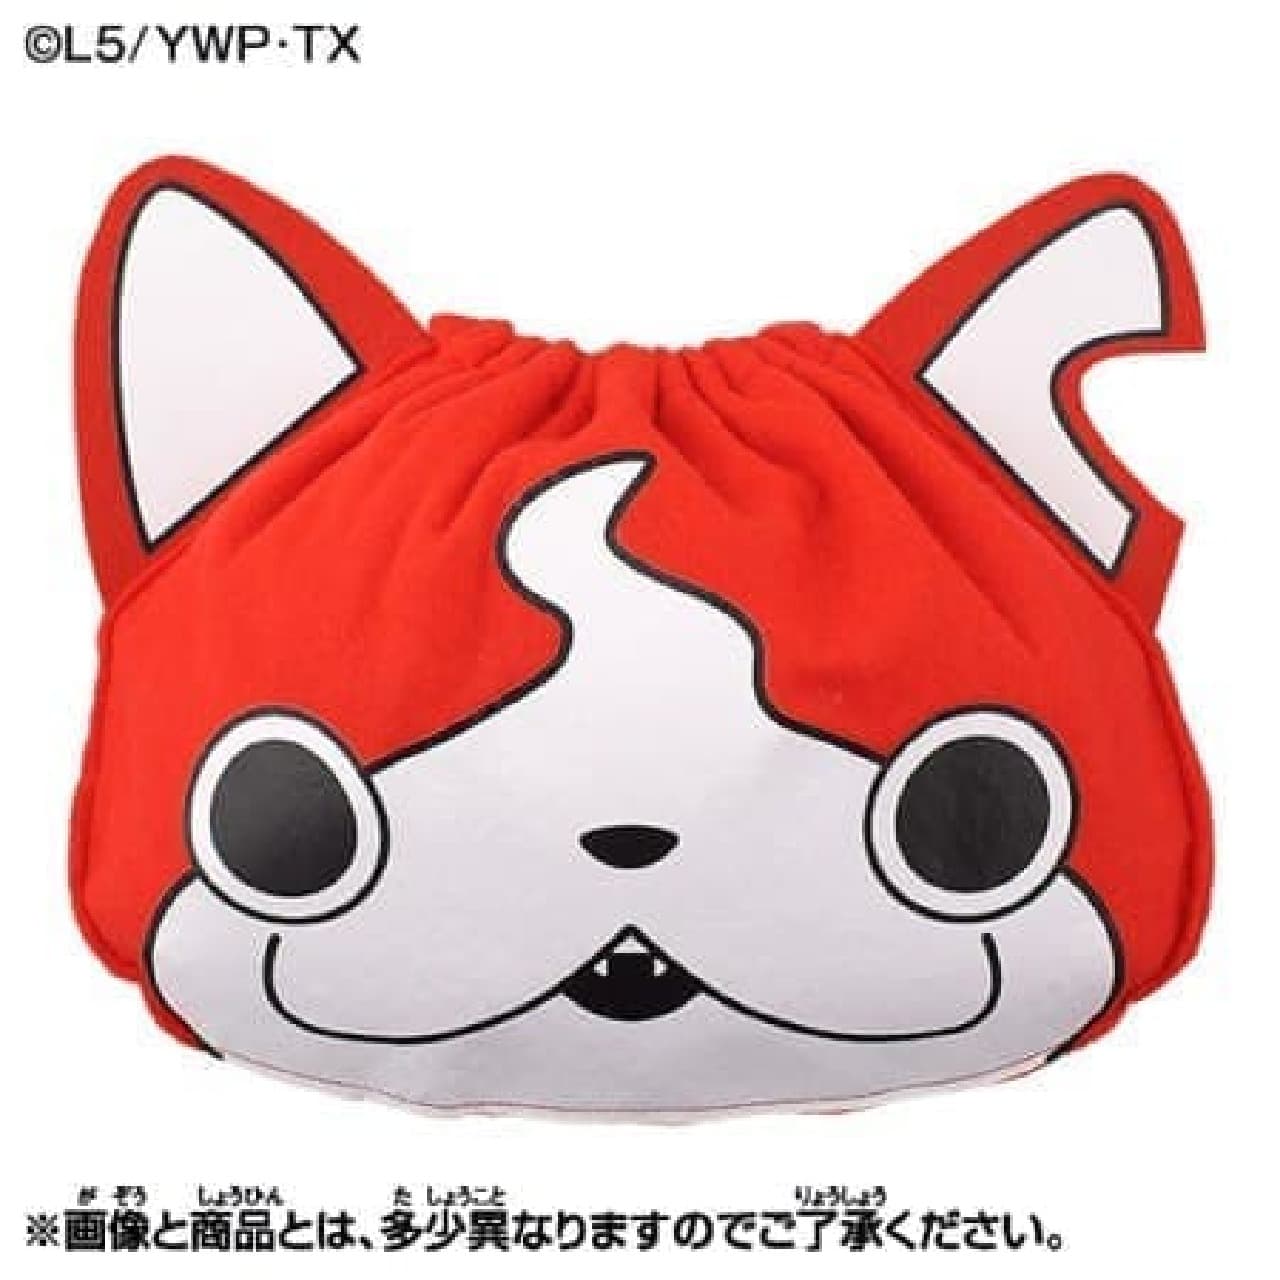 Jibanyan purse with a width of 30 cm! I want to pack sweets!